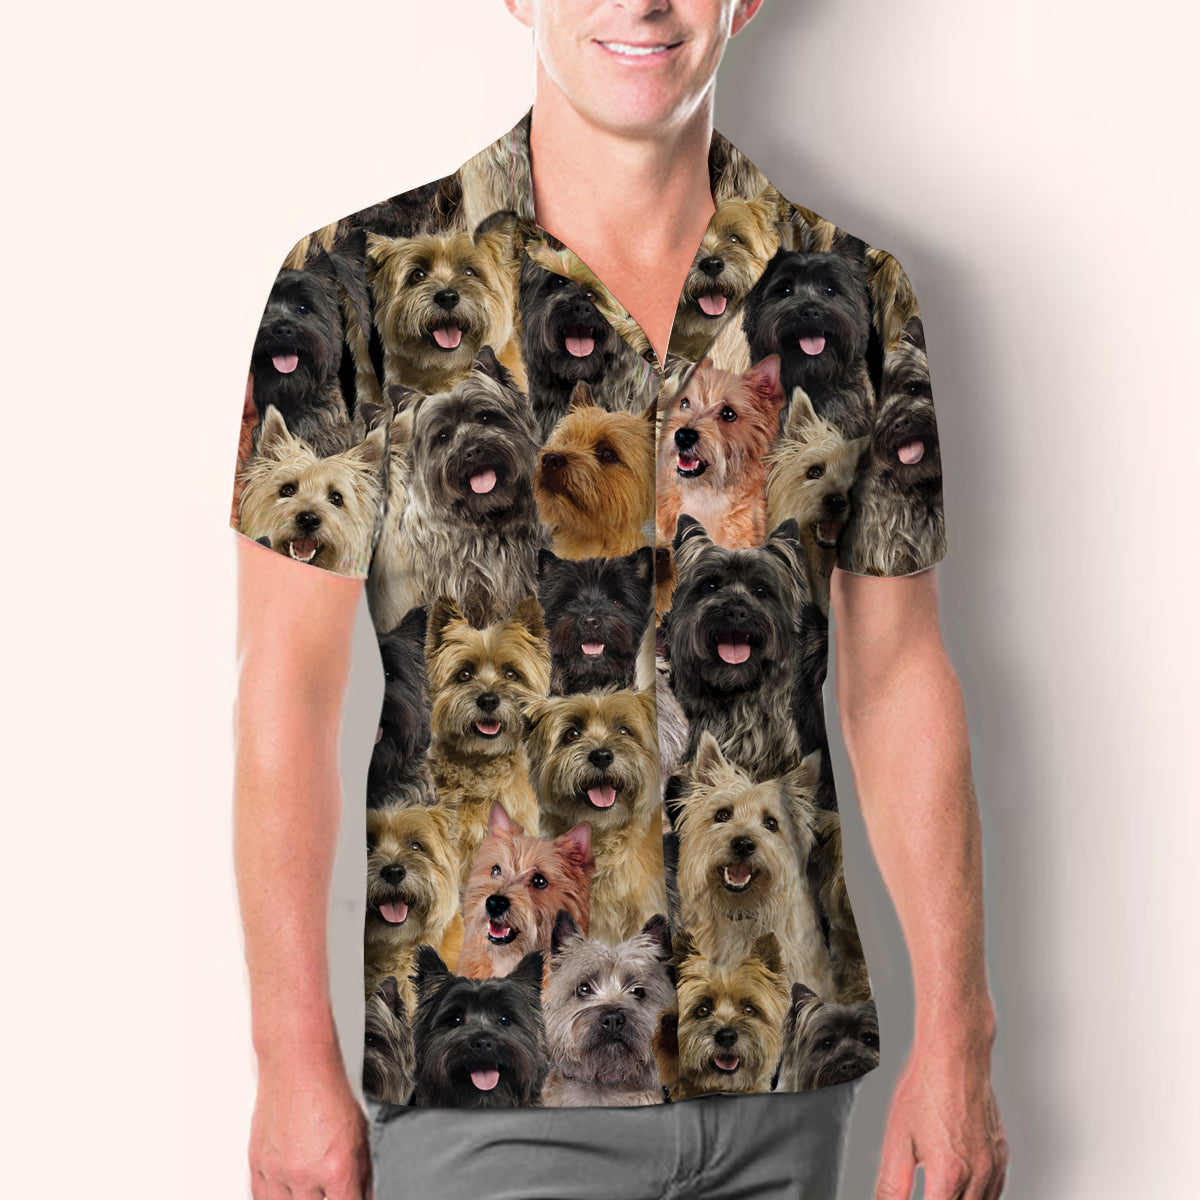 You Will Have A Bunch Of Cairn Terriers - Shirt V1